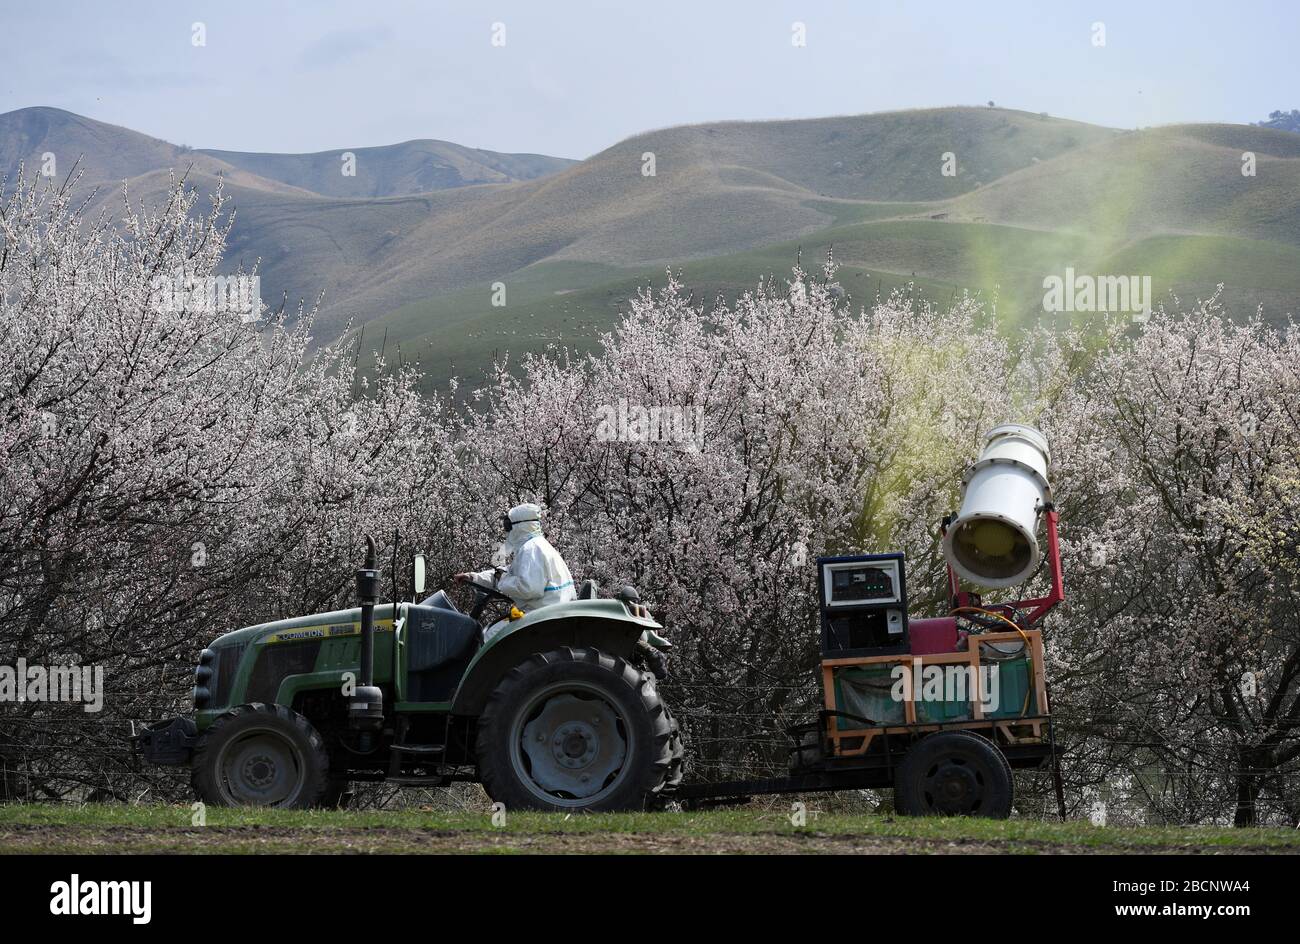 Ili, China's Xinjiang Uygur Autonomous Region. 4th Apr, 2020. A staff member sprays pesticide to apricot trees at a valley in Xinyuan County of Ili Kazakh Autonomous Prefecture, northwest China's Xinjiang Uygur Autonomous Region, on April 4, 2020. Credit: Hang Rui/Xinhua/Alamy Live News Stock Photo